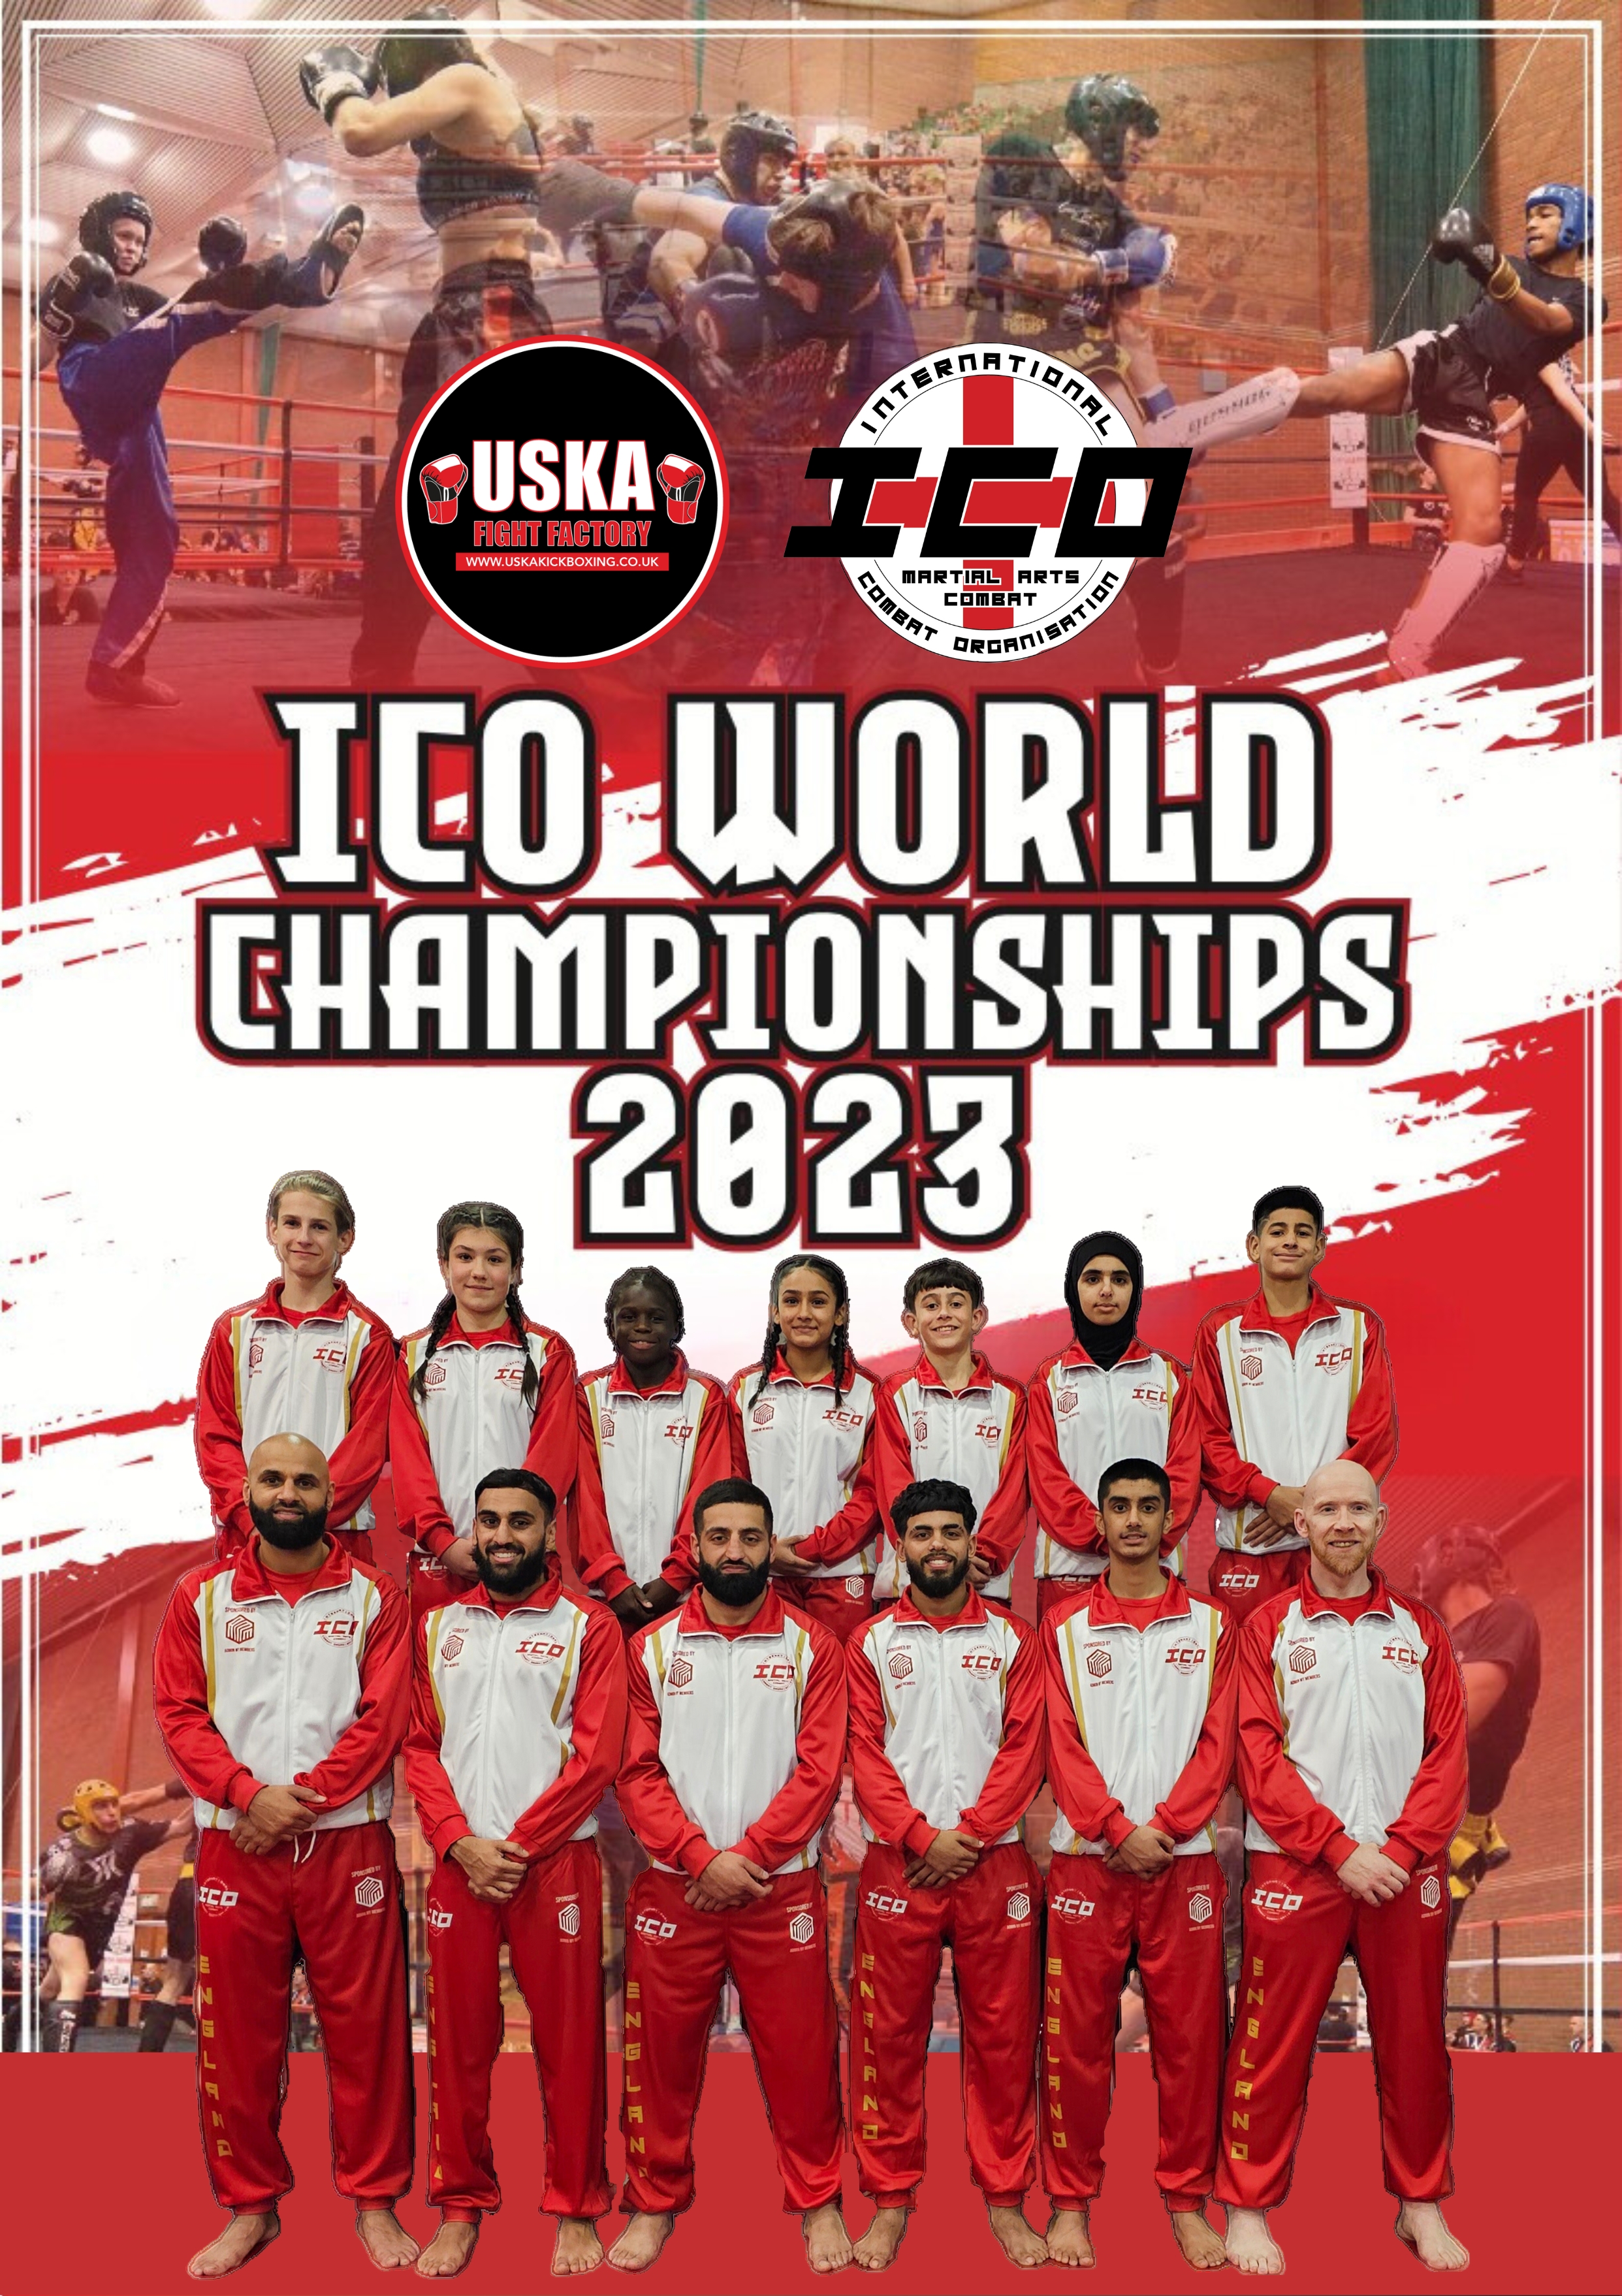 19-10-23 - USKA Fight Team set off to weigh in at the ICO World Championships 2023